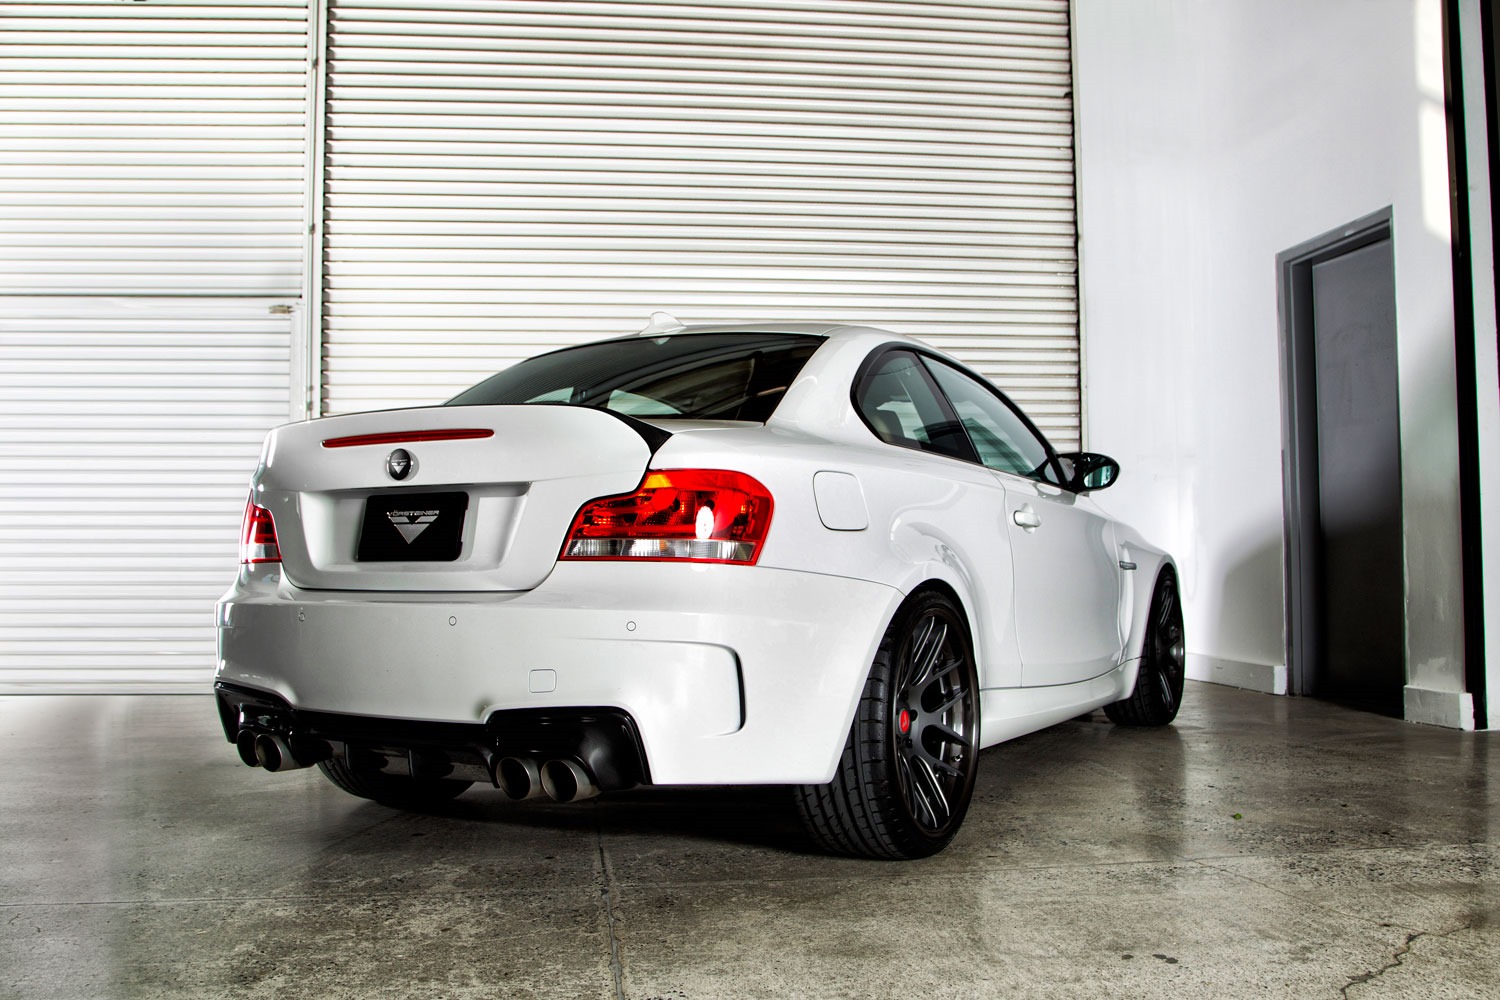 Bmw 1m coupe tuning #6